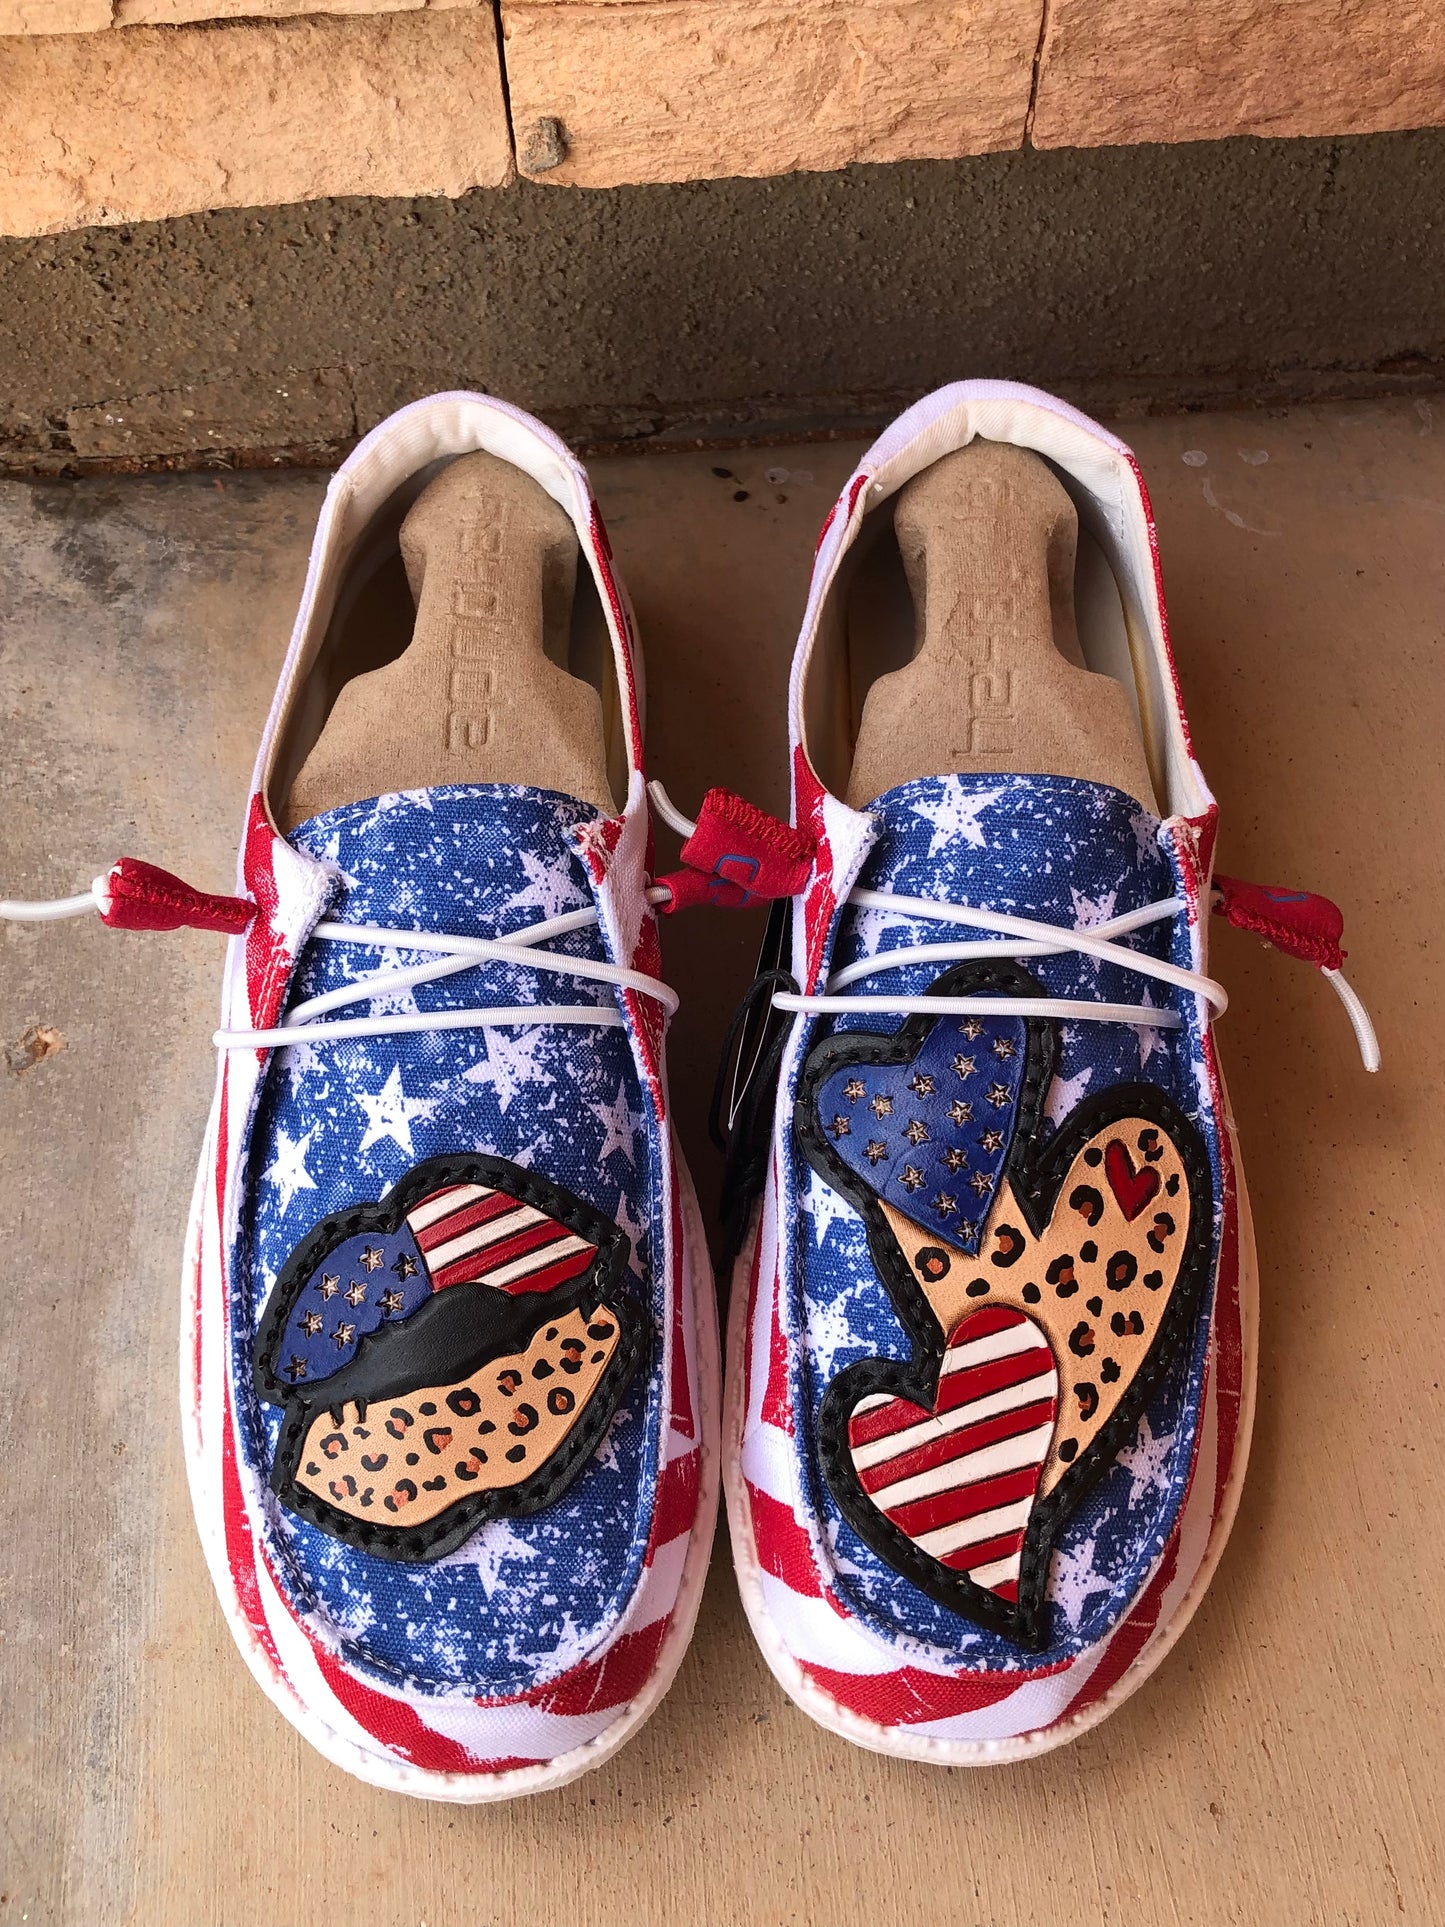 Women’s tooled leather patriotic lips and hearts Star Spangled Hey Dude shoes size 6